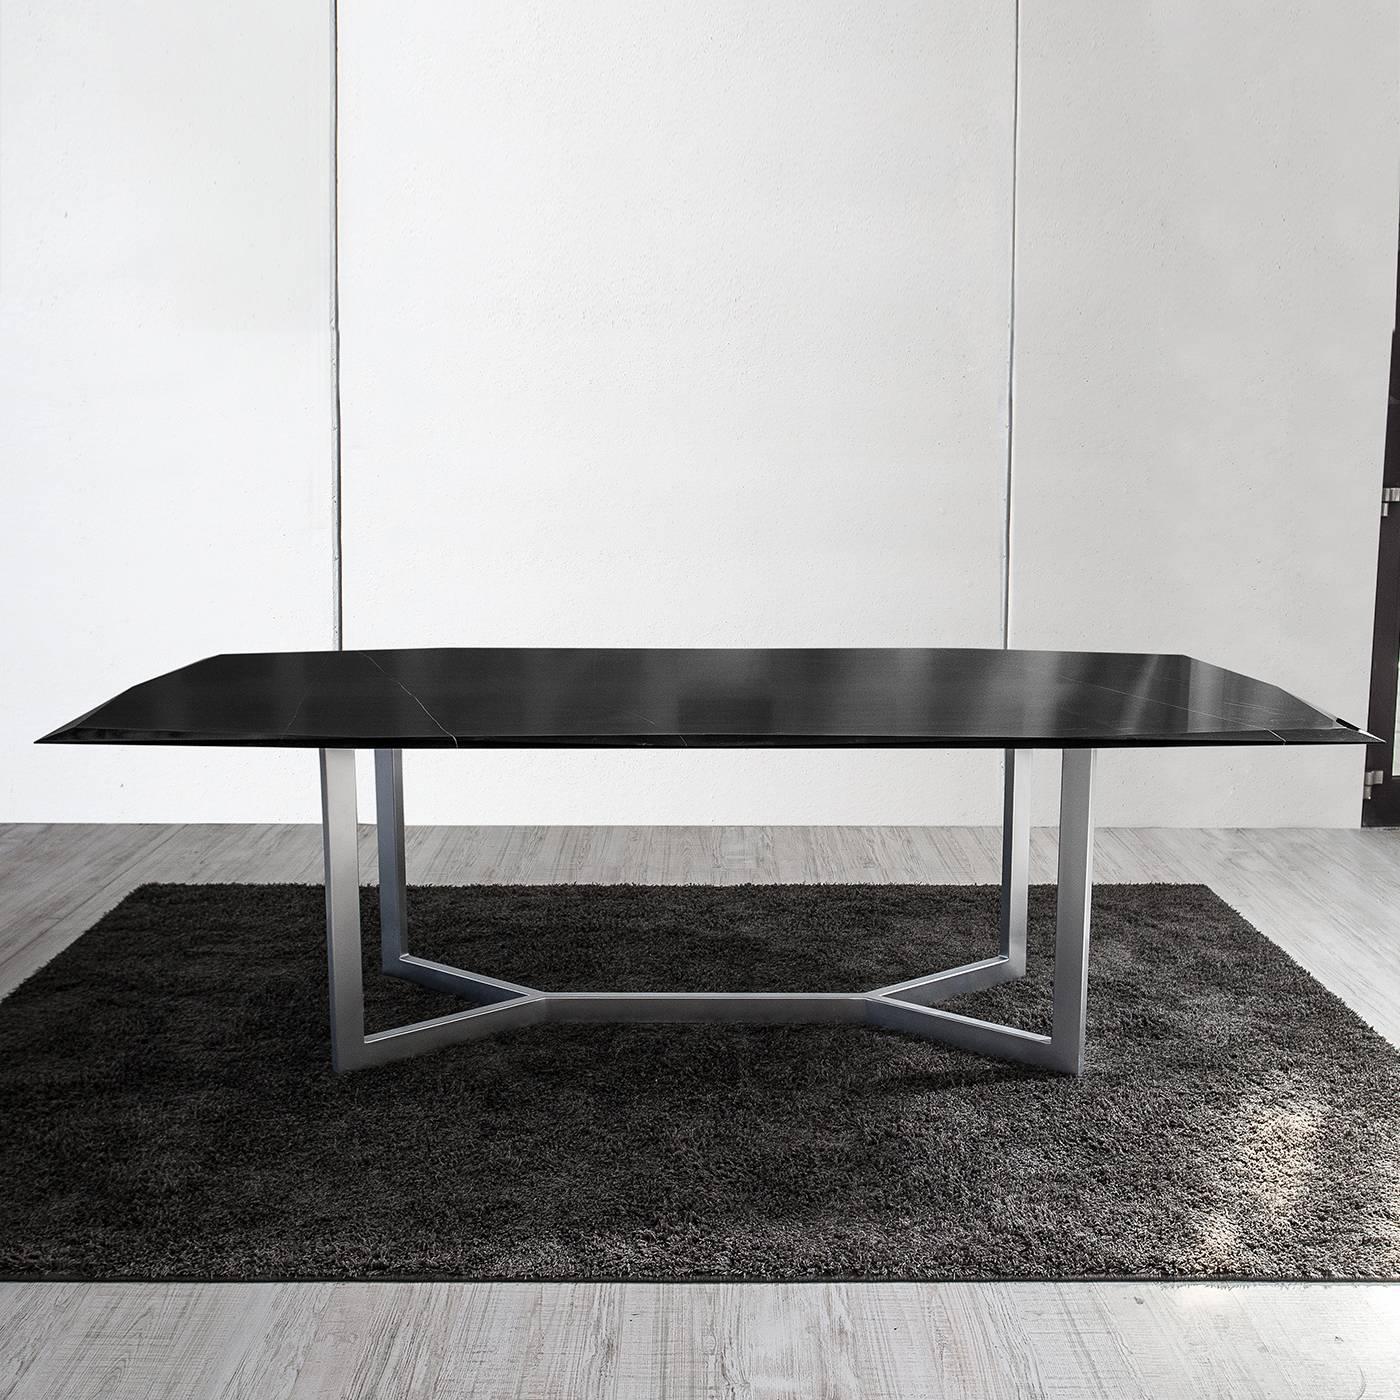 Inspired by Brunelleschi, the master of early Renaissance architecture, this table was designed by Joe Gentile and Fabio Crippa of Studio ADL. The black Tekeze marble top displays a unique silhouette, with a finish at the edges that makes it